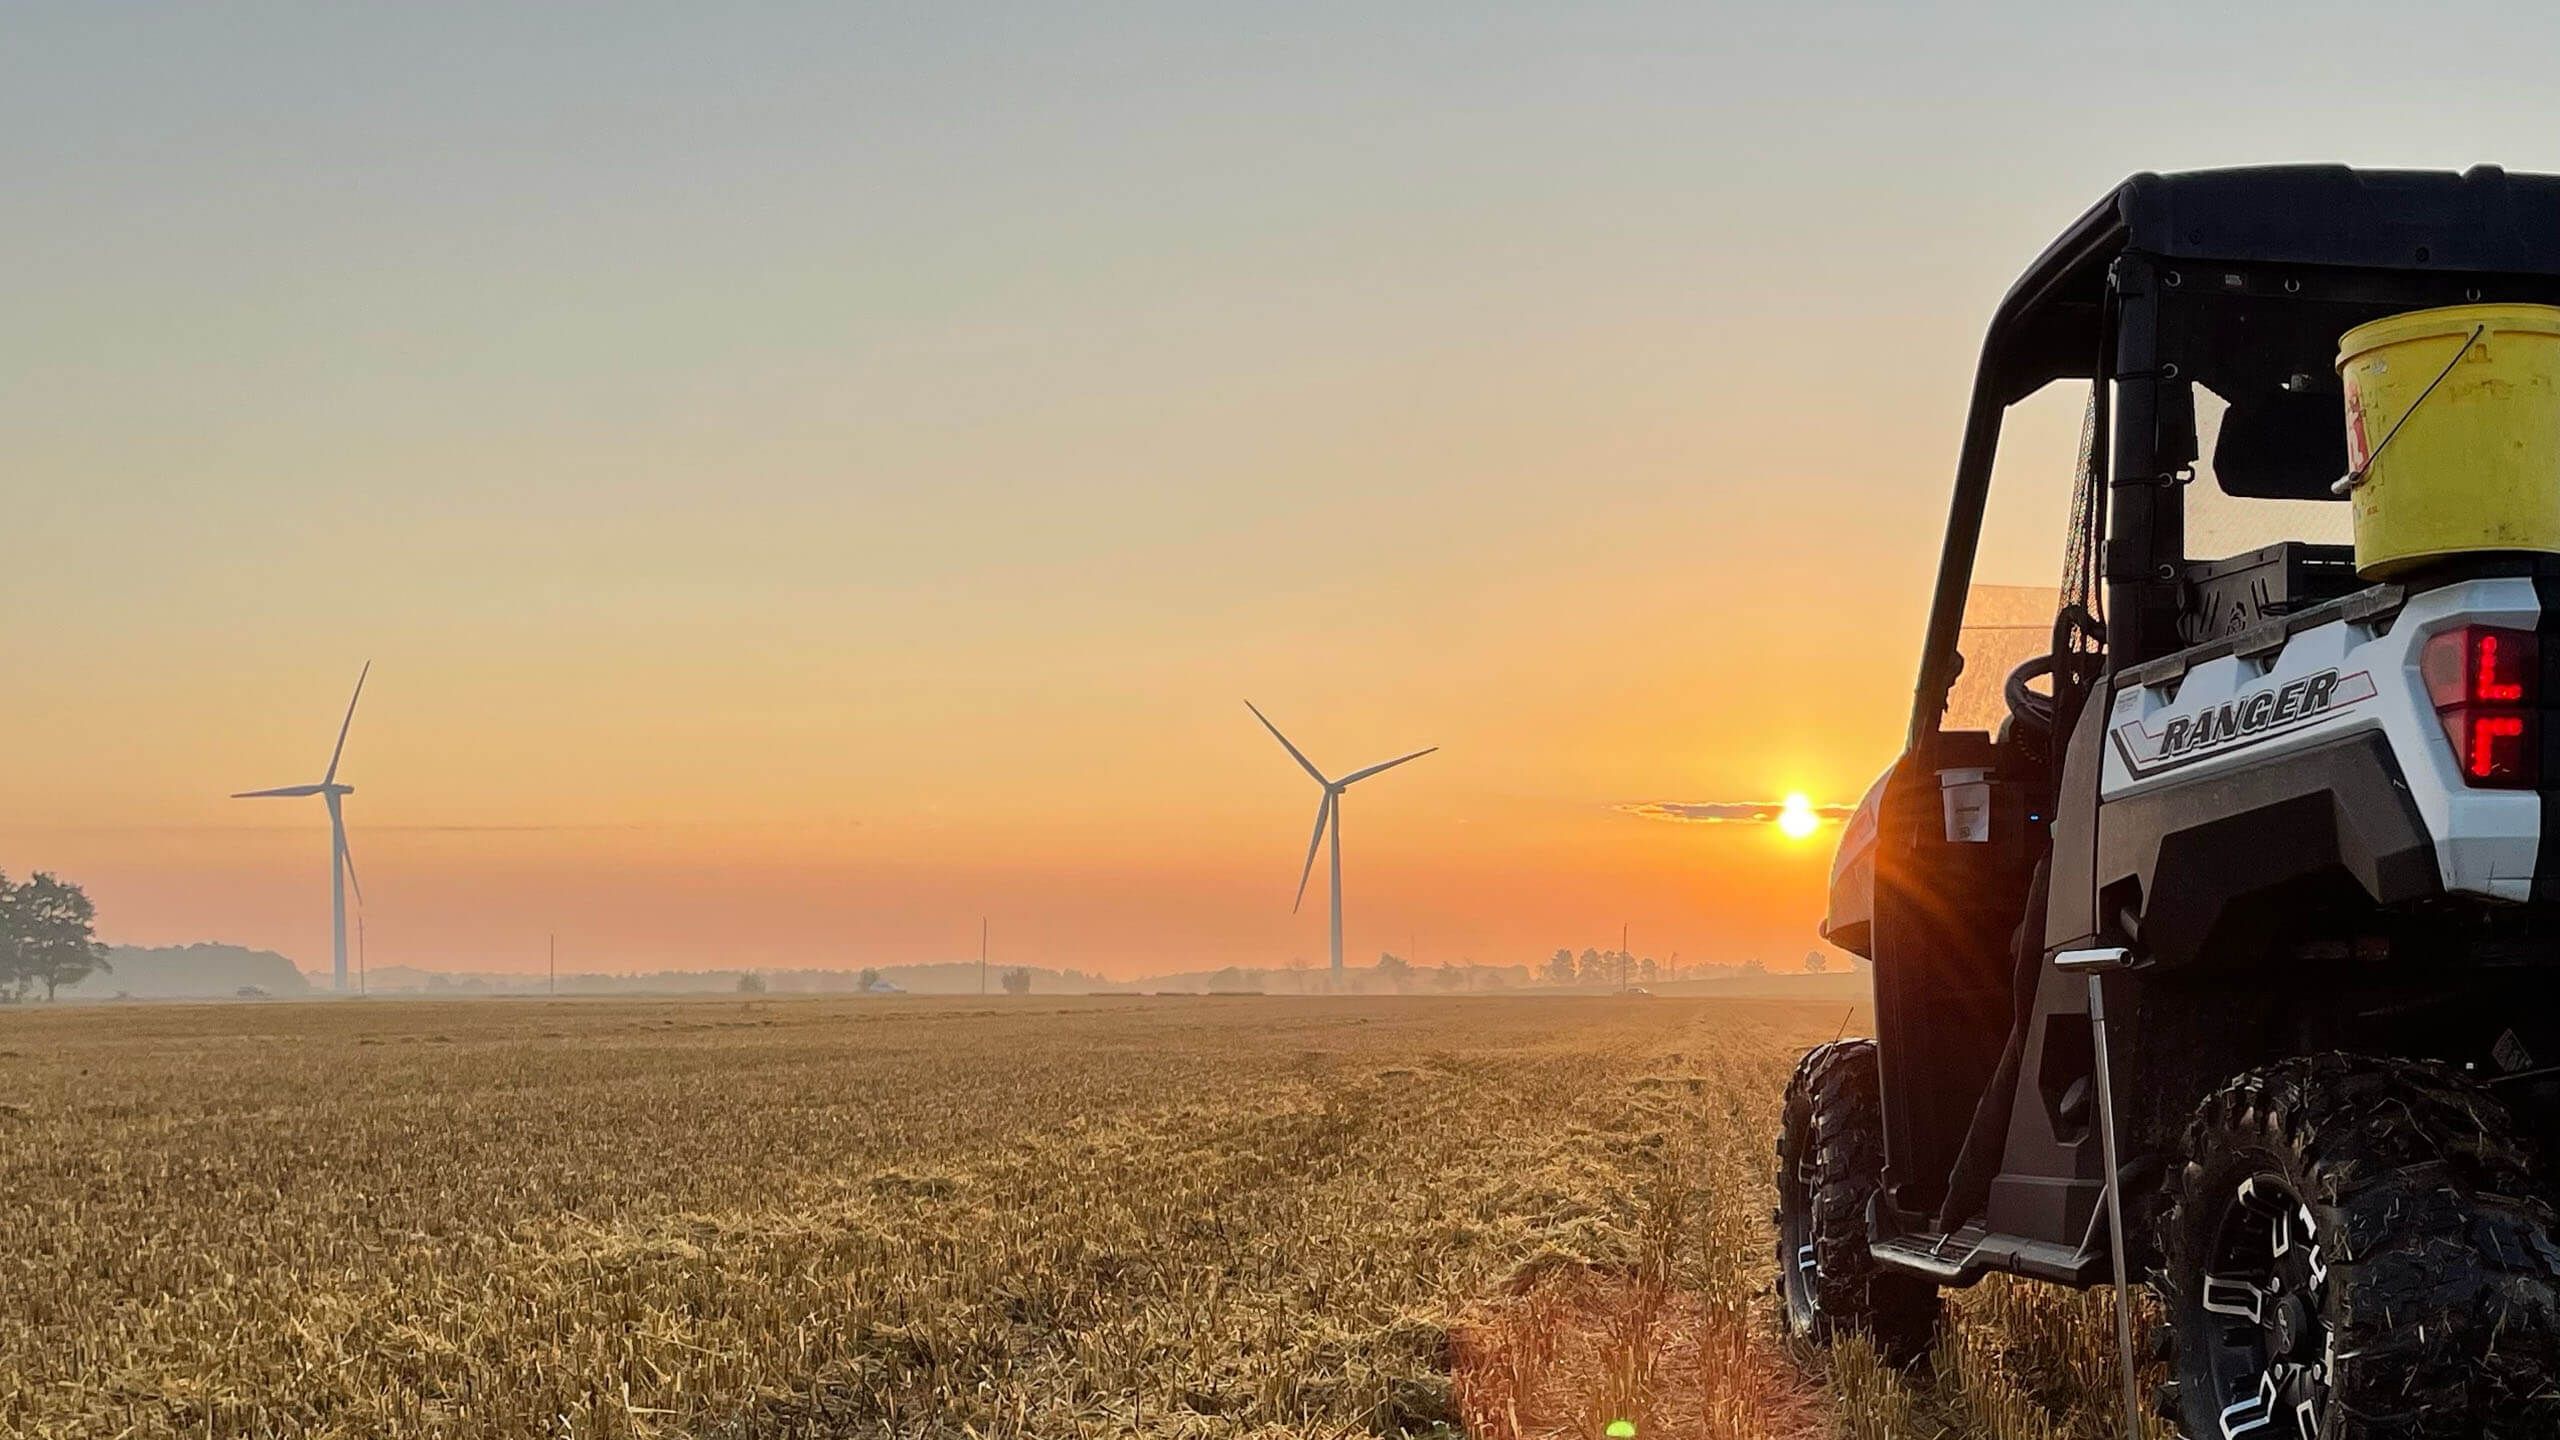 Holmes Agro Ranger on crop with windmills and sunset in the background